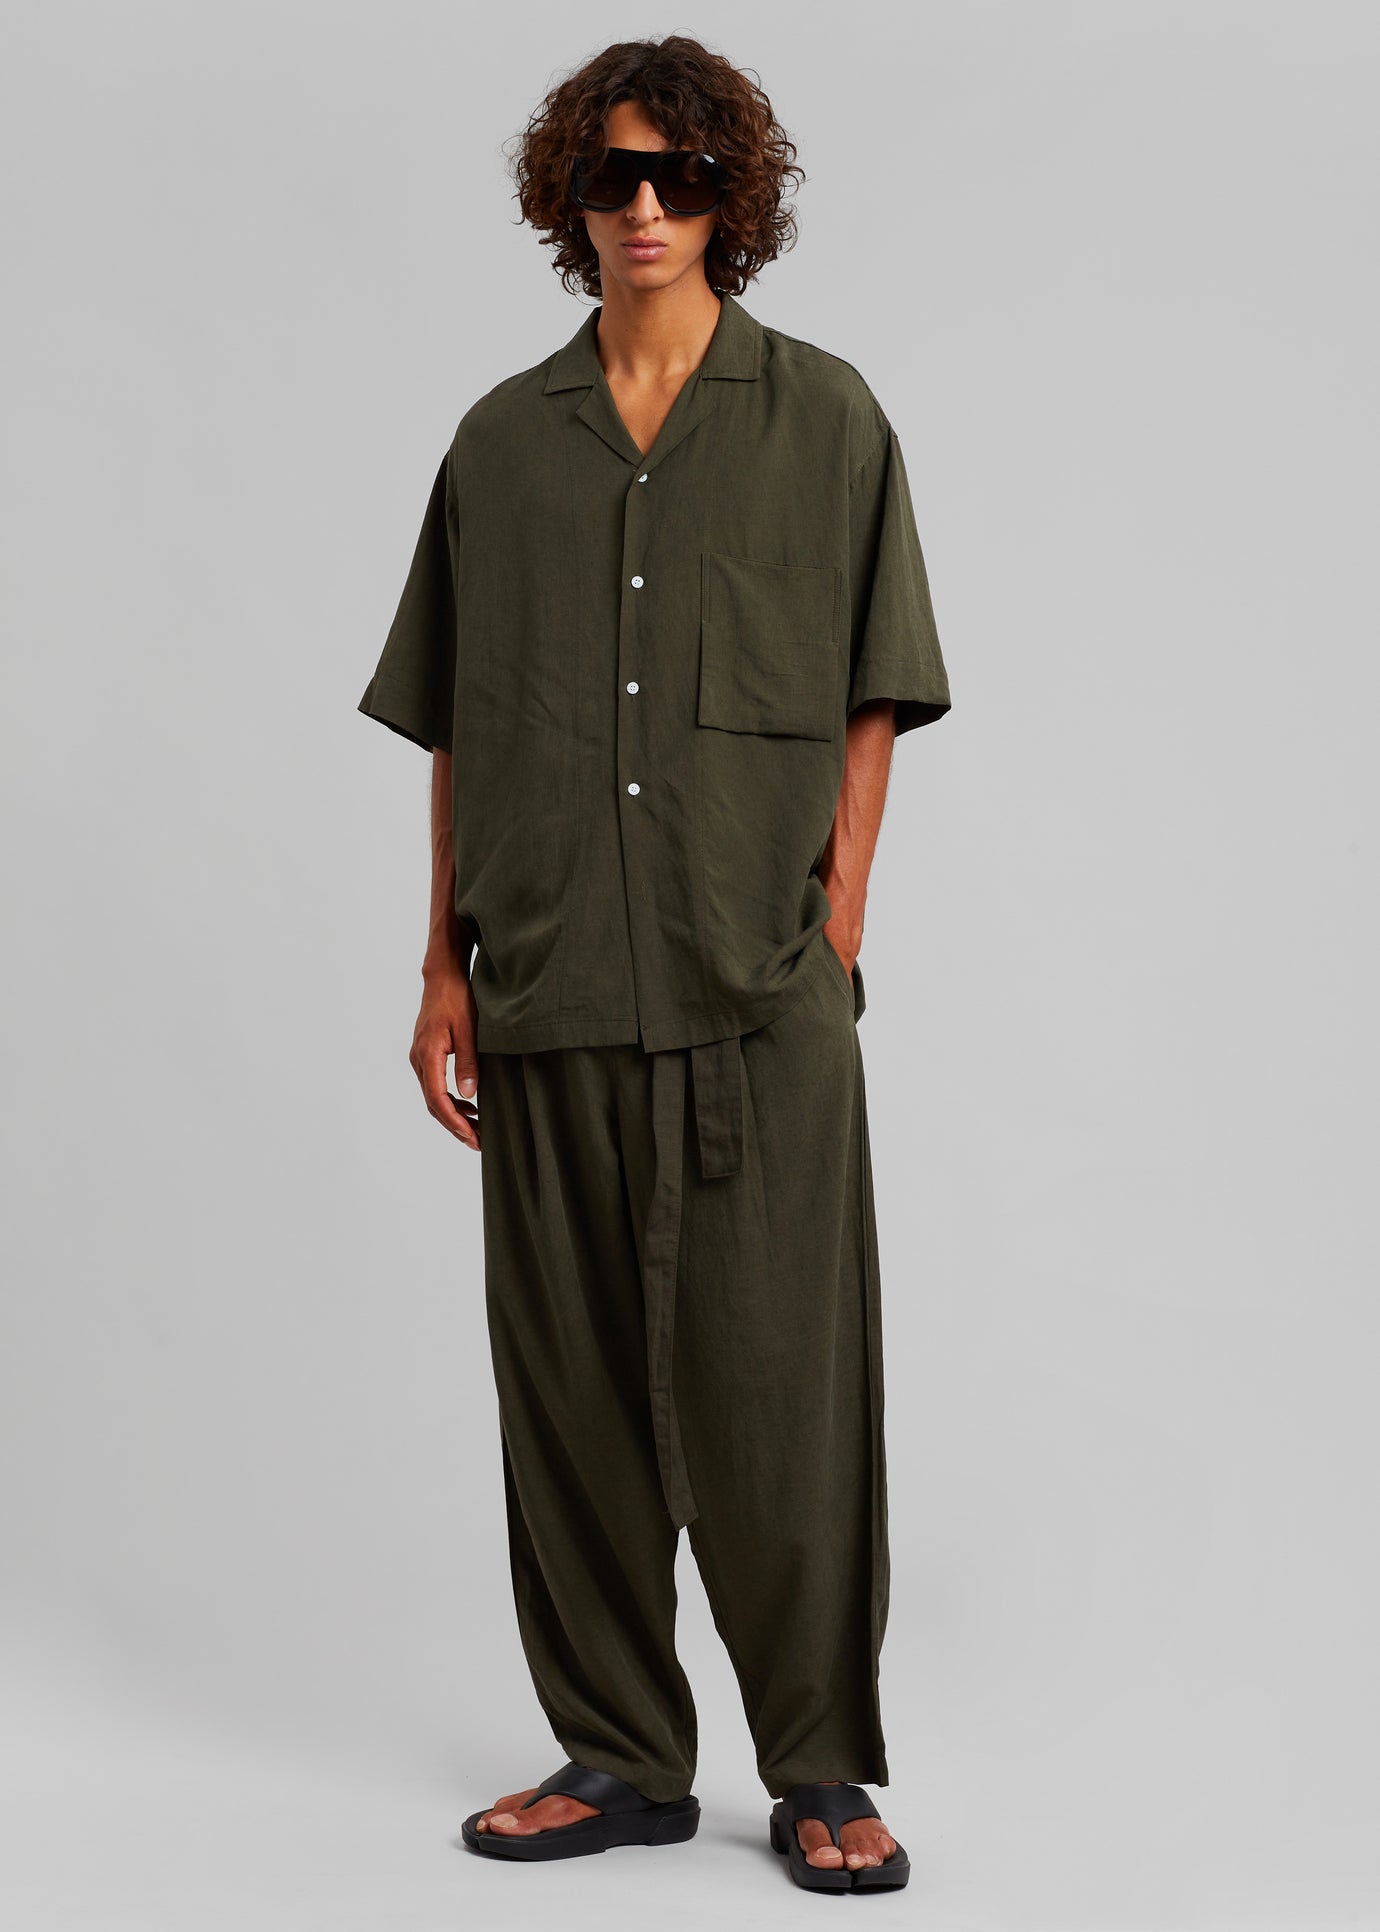 Georg Puch Shirt - Olive